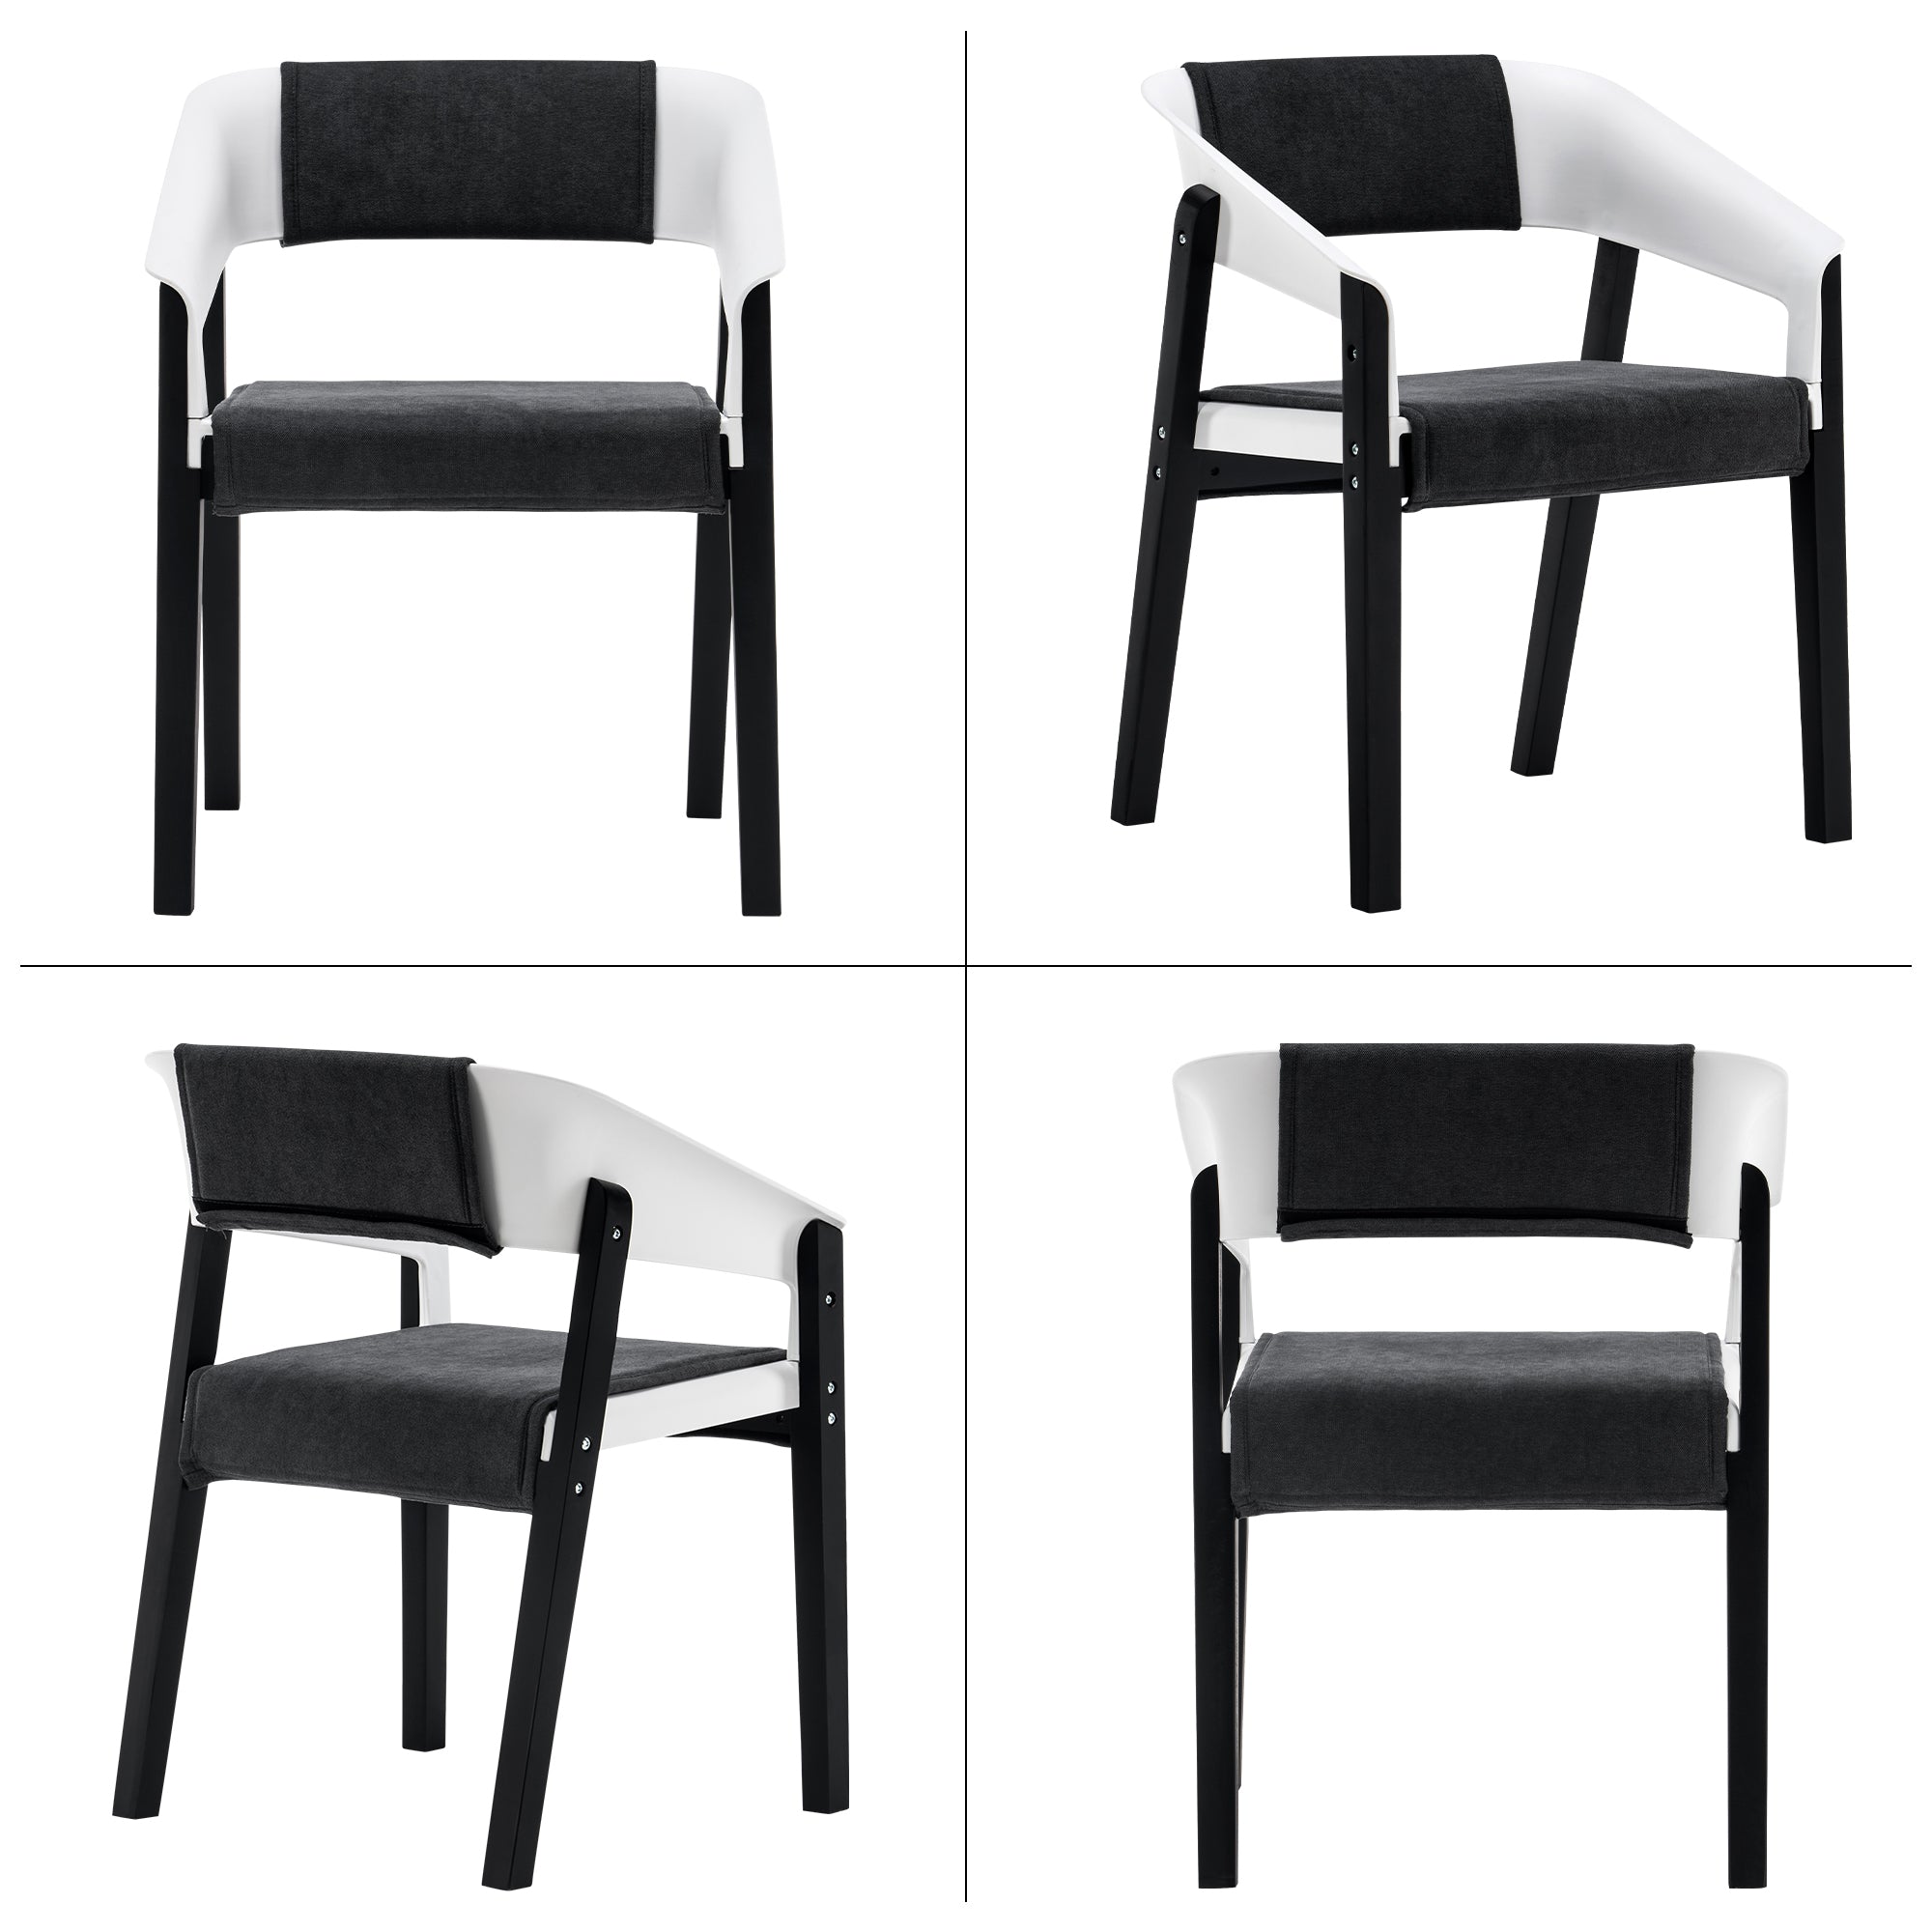 Ivinta Black Outdoor Dining Chair with Padded Cushion, Mid Century Modern Dining Chairs Set of 2,